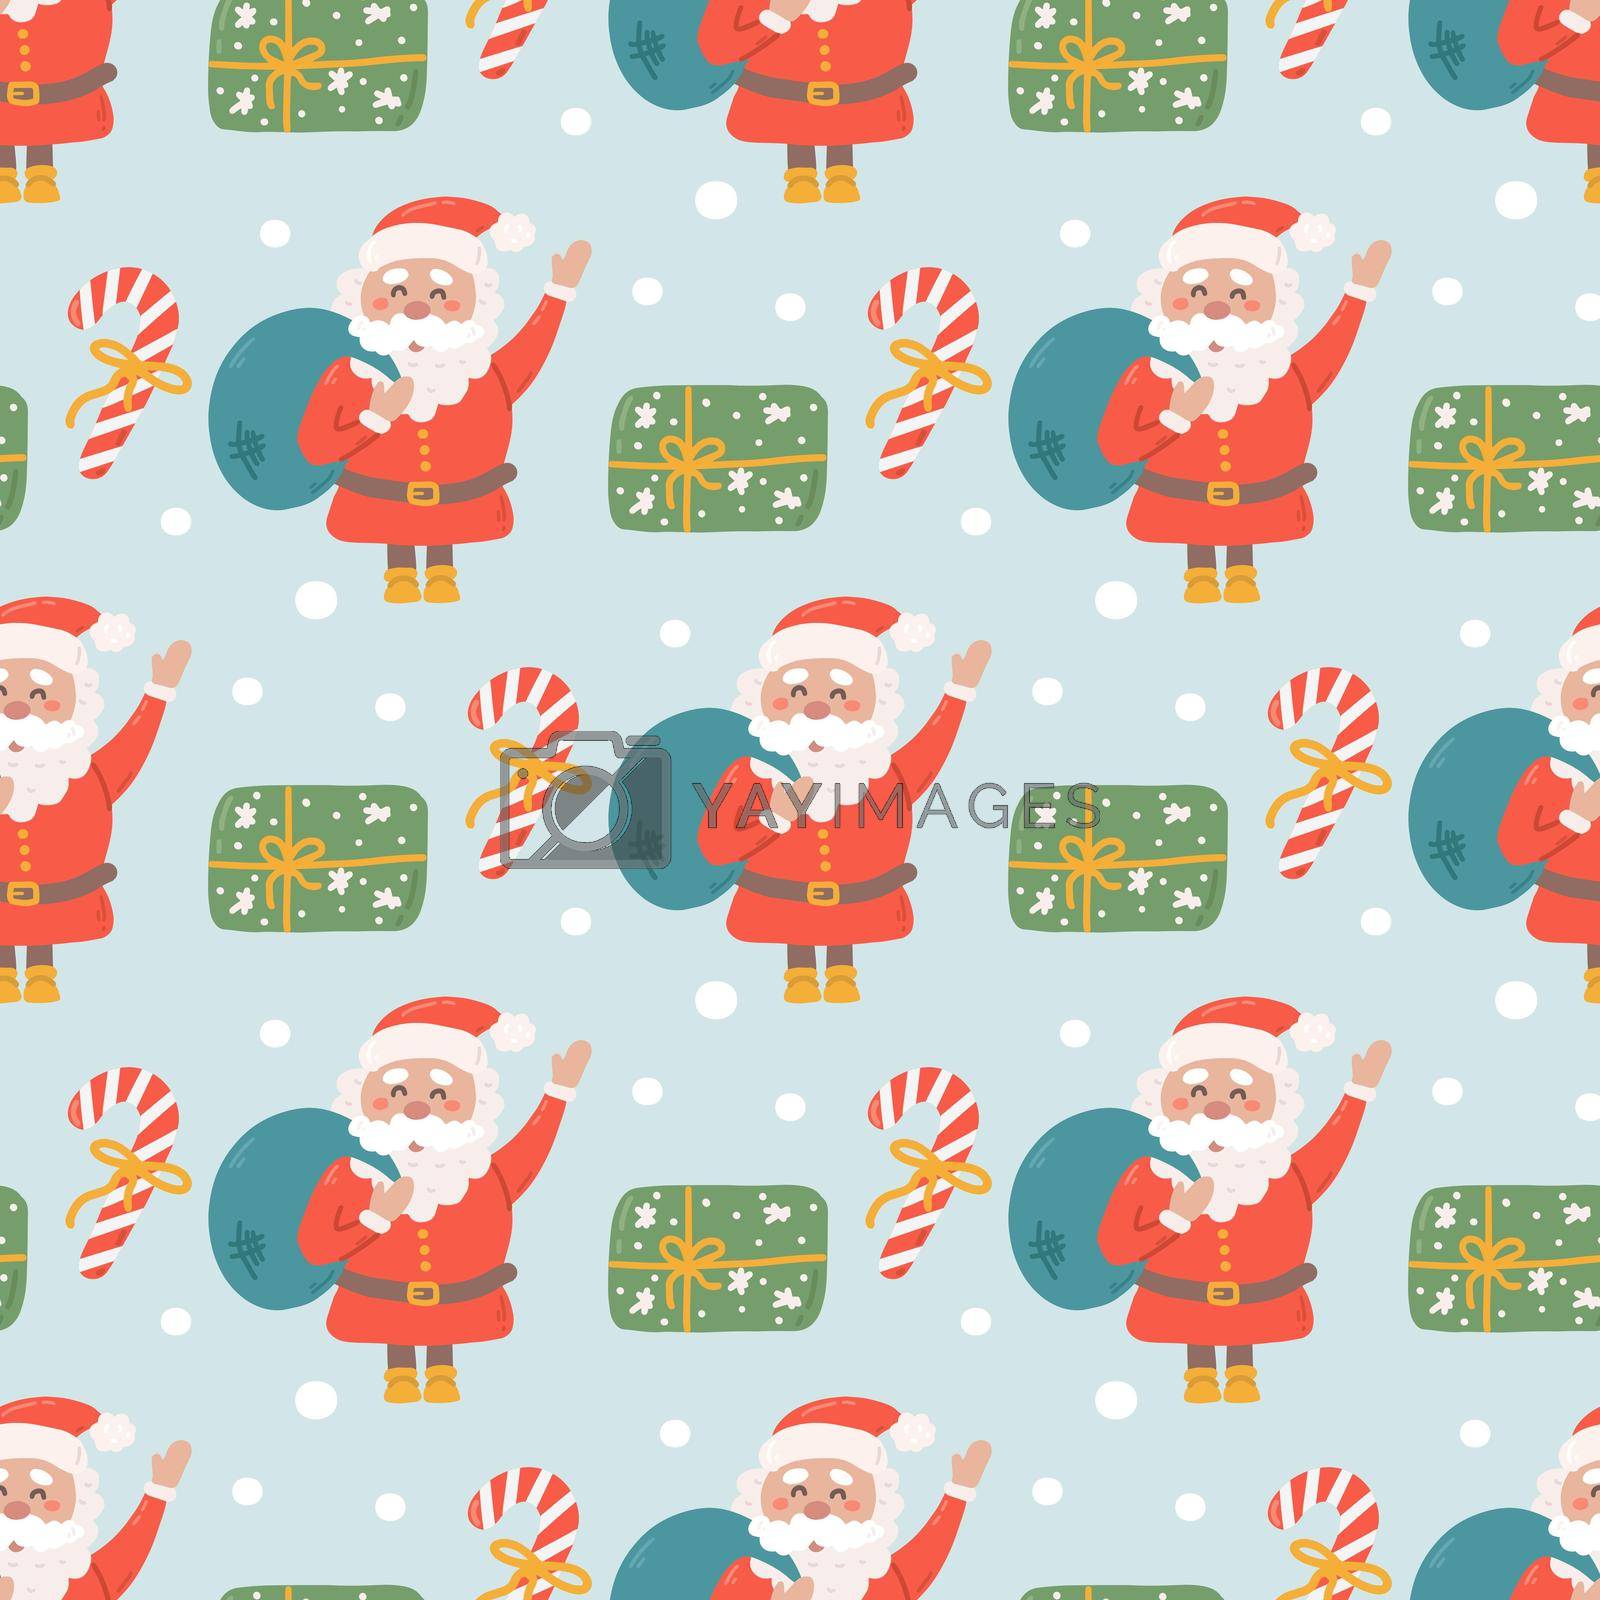 Royalty free image of Santa with gifts and sweets, vector seamless Christmas pattern by vetriciya_art